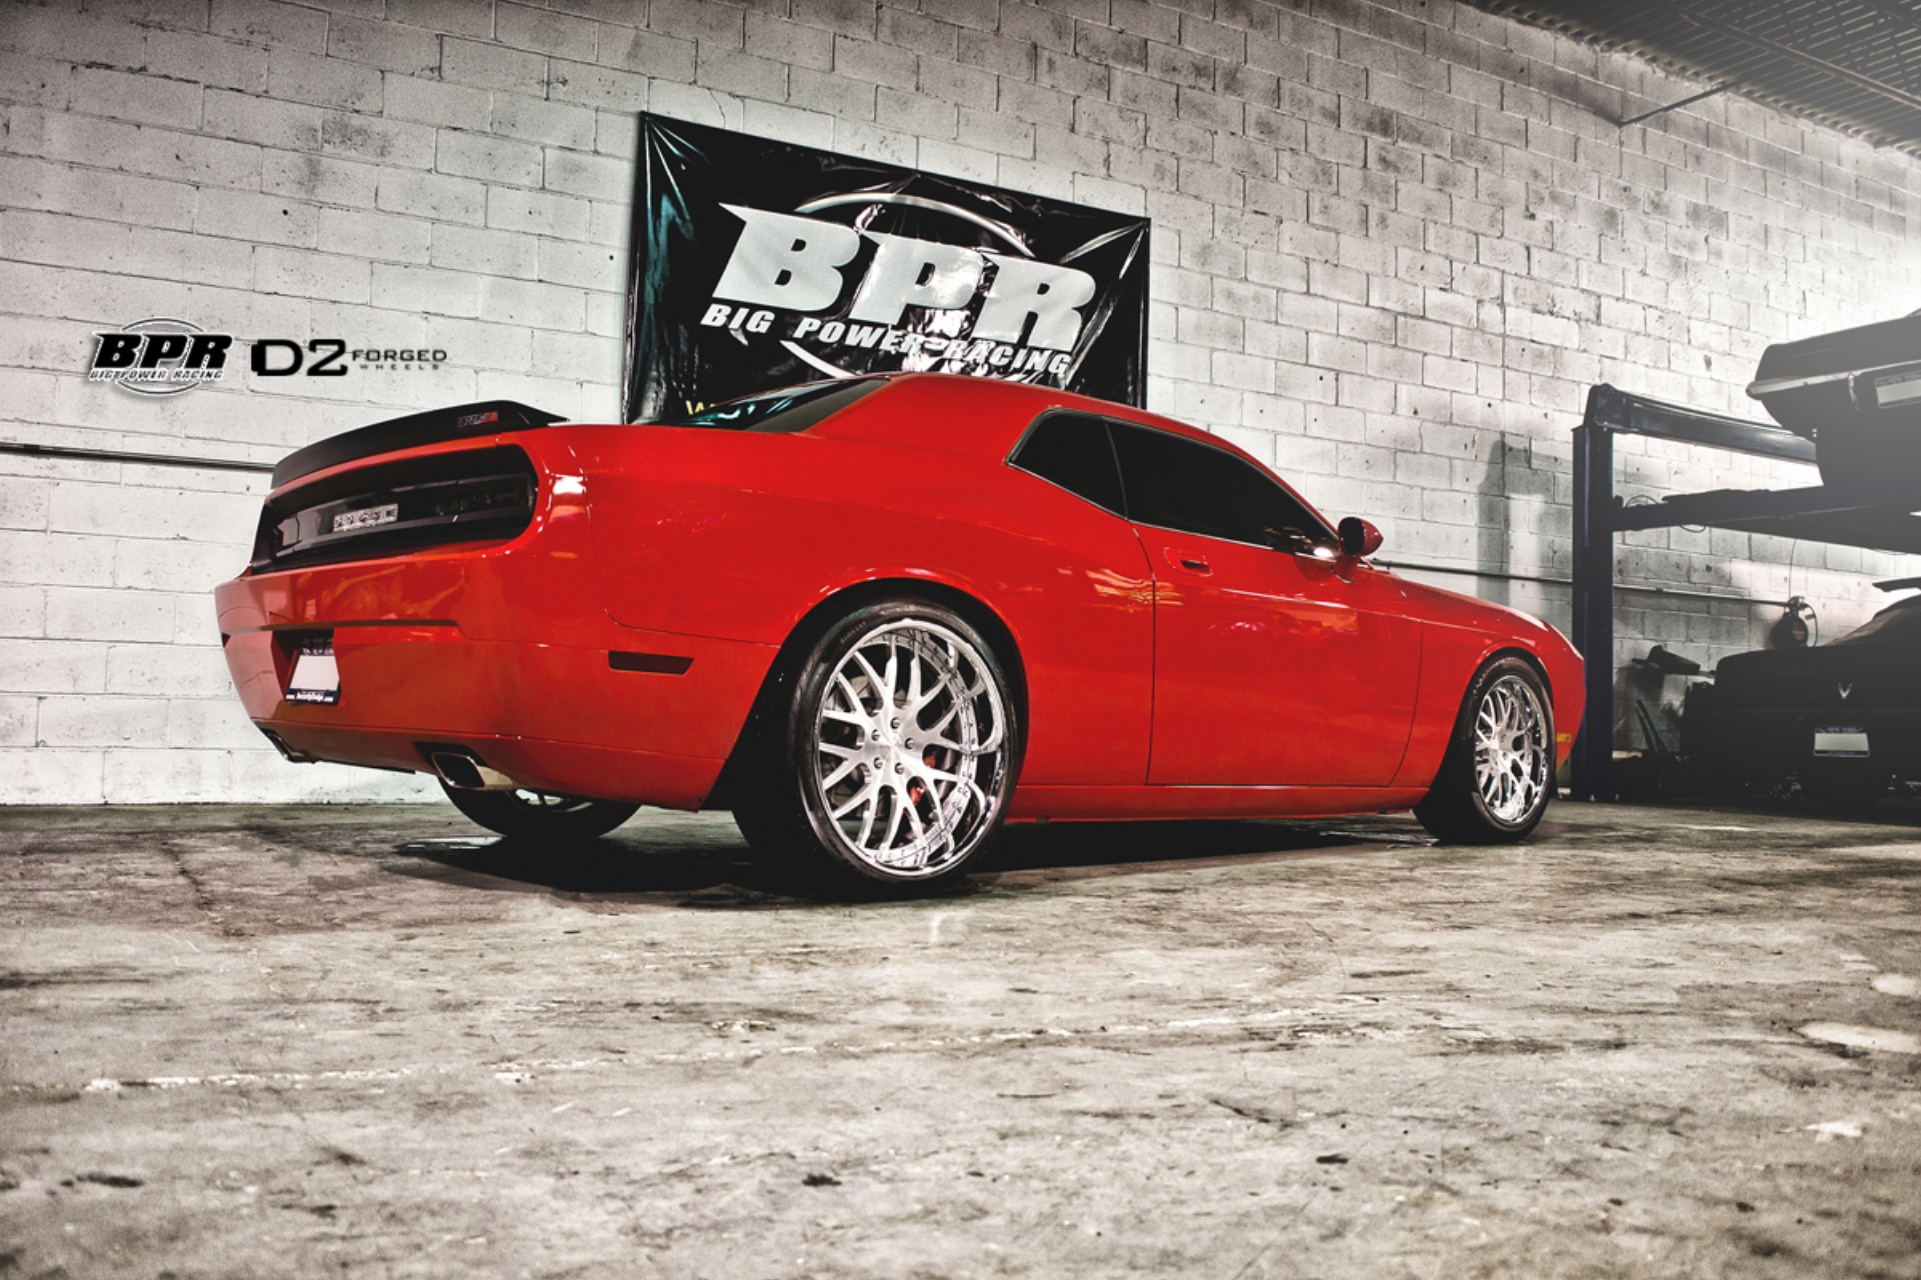 2012, D2forged, Dodge, Challenger, Srt8, Tuning, Muscle, Hot, Rod, Rods Wallpaper